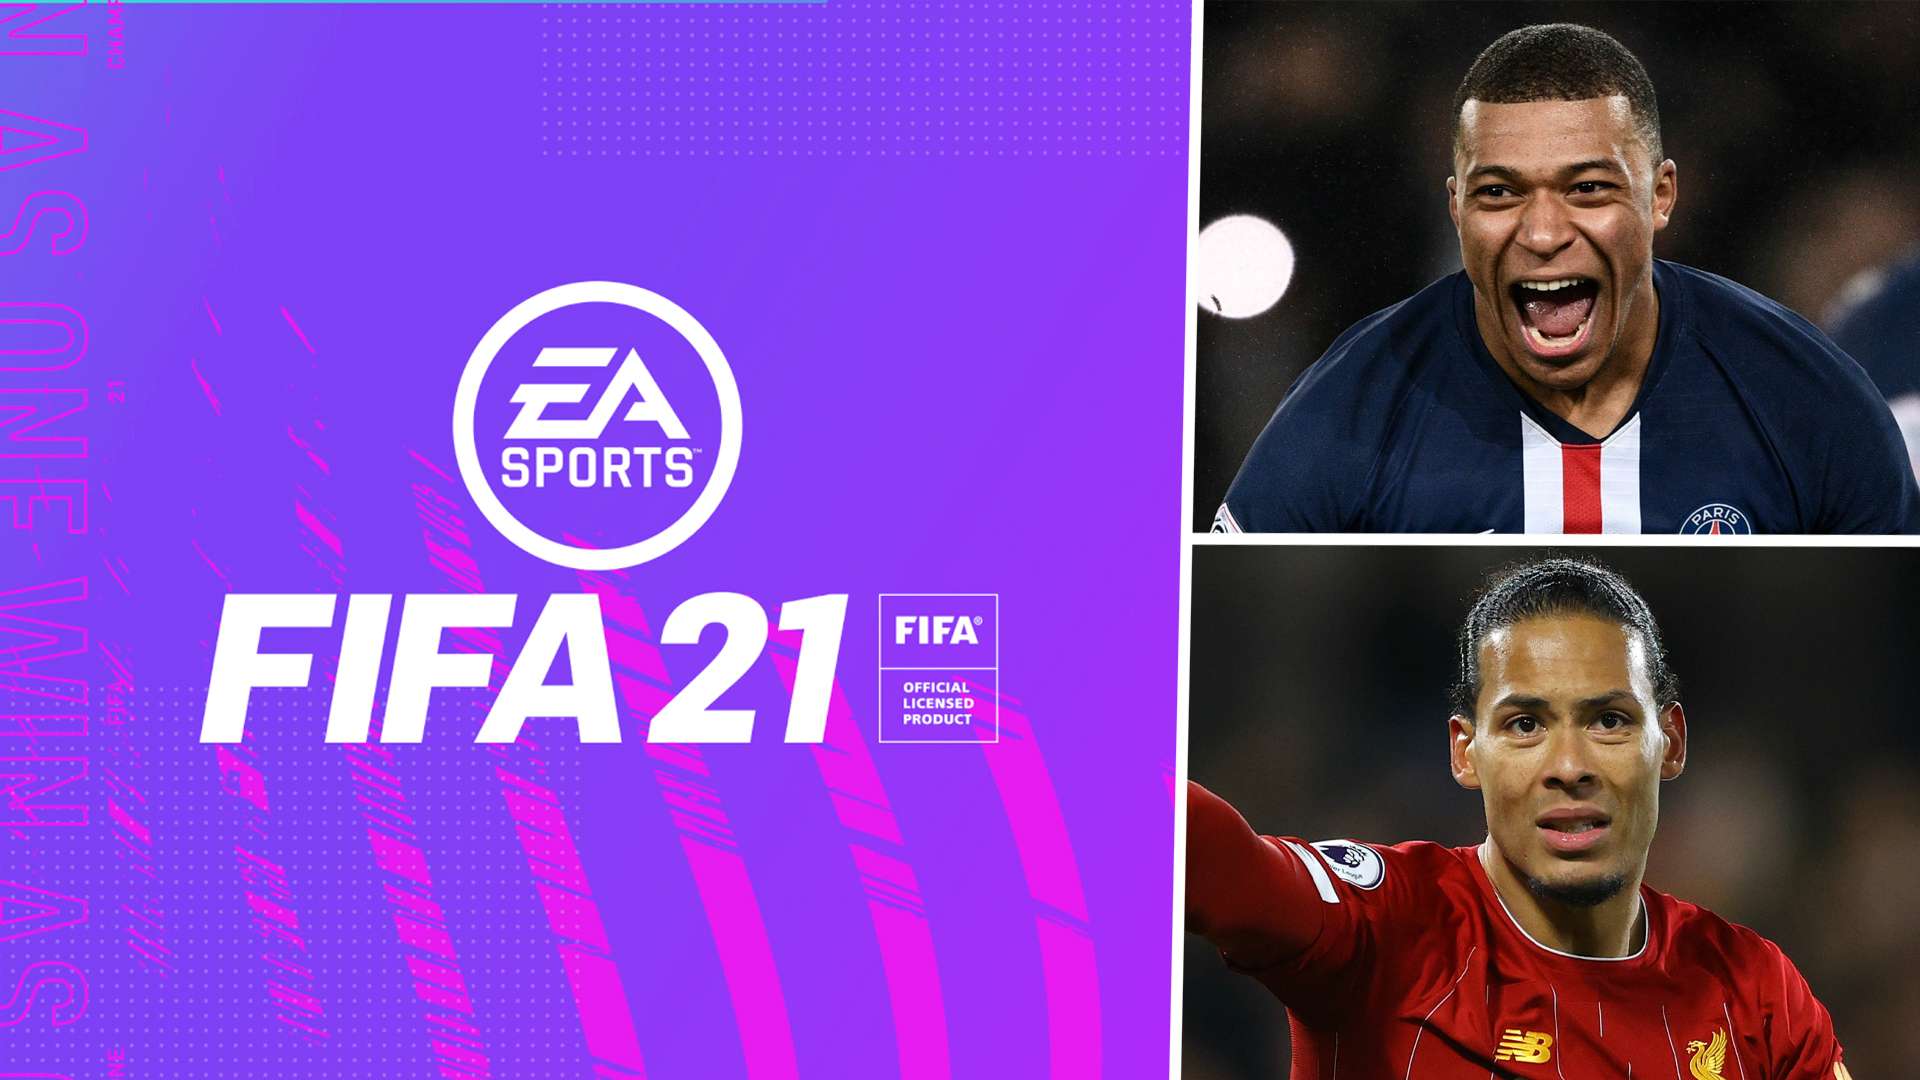 FIFA 21 will support Dual Entitlement on PS5 and Xbox Series X Let's talk about video games